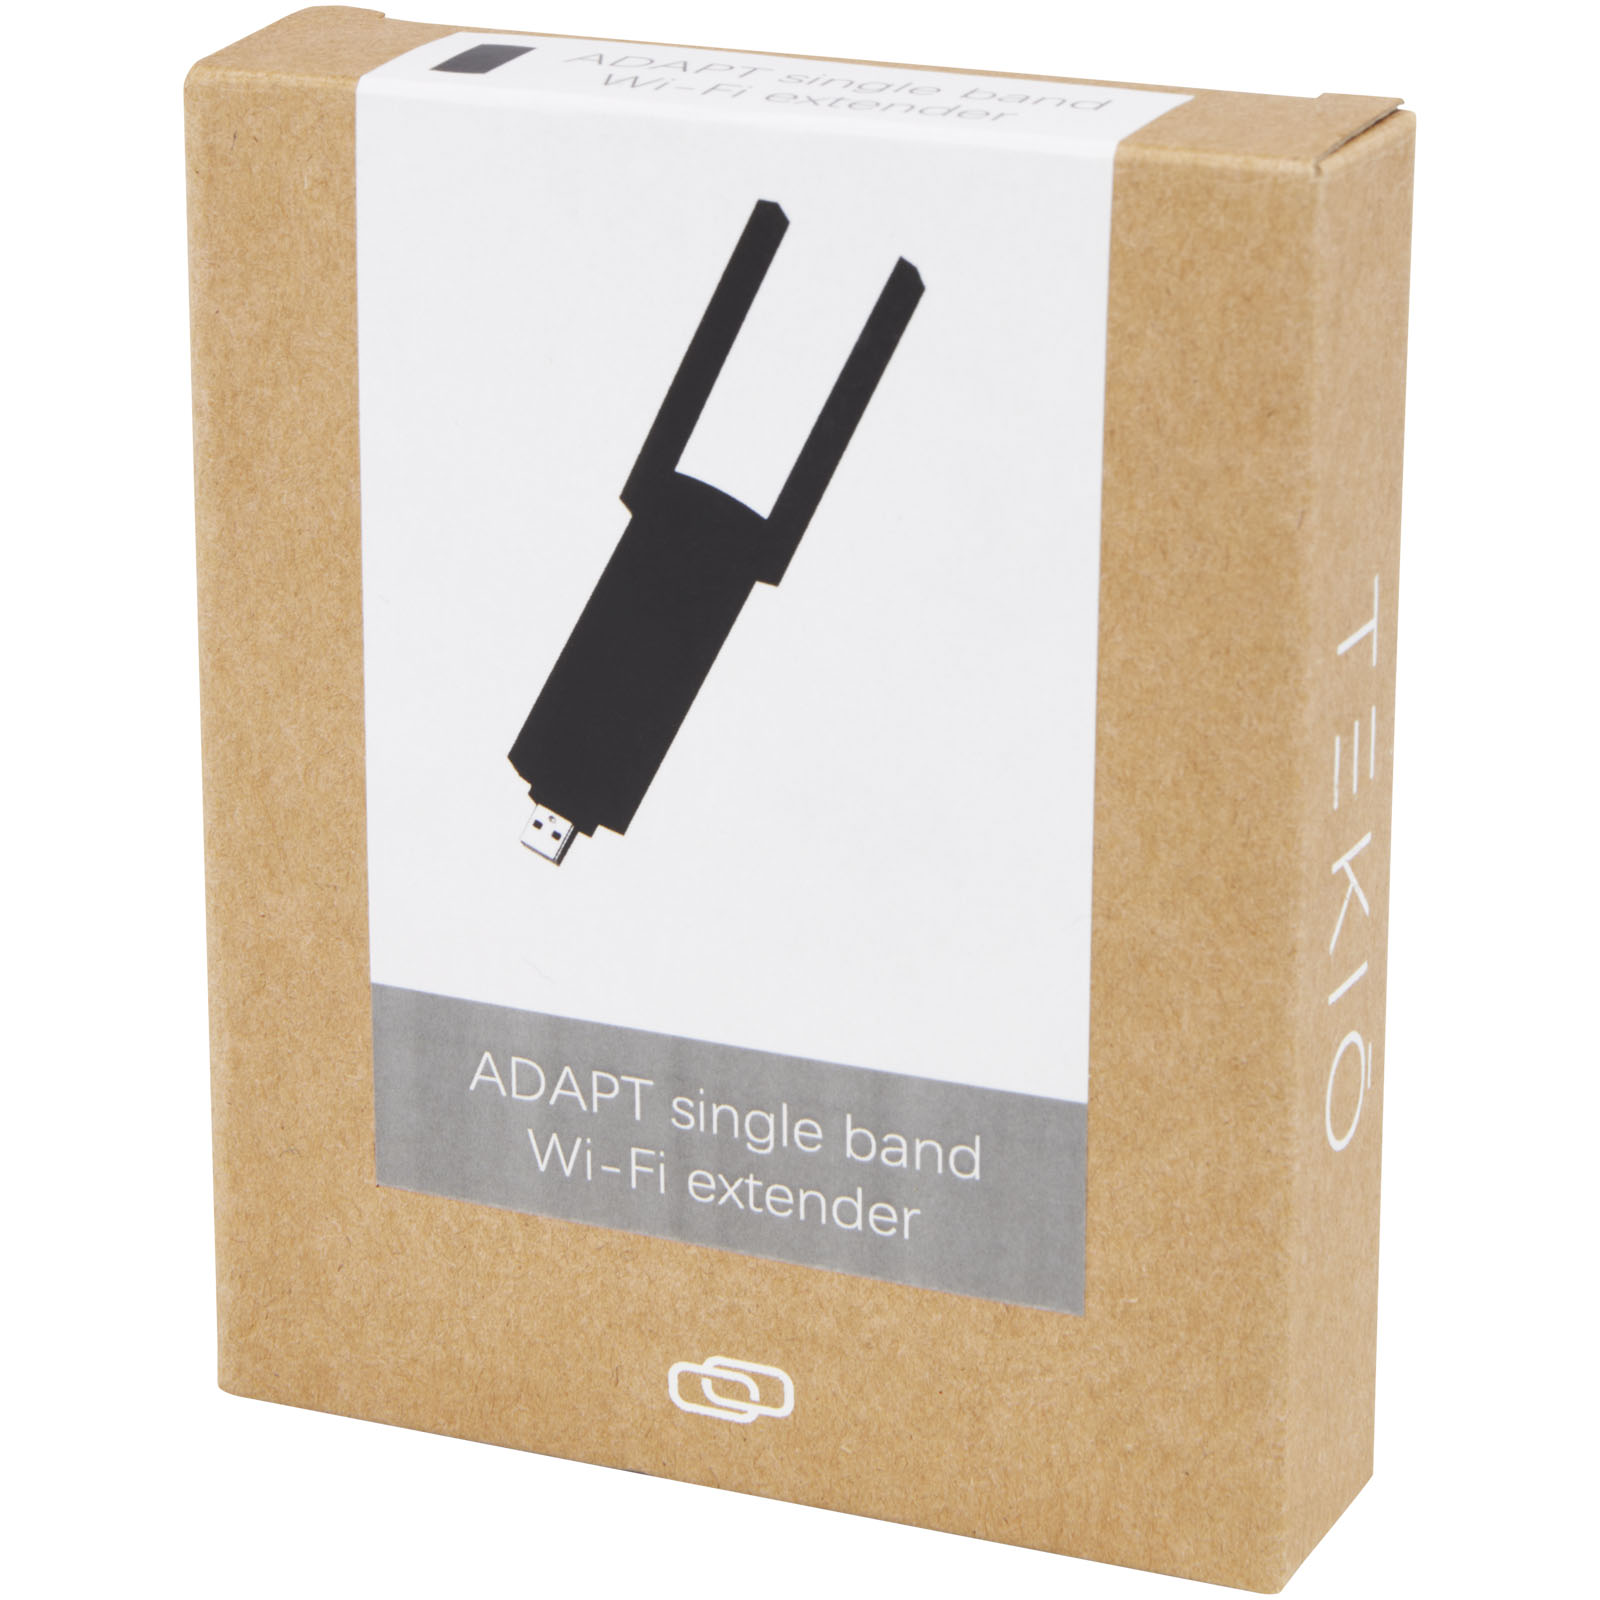 Advertising Computer Accessories - ADAPT single band Wi-Fi extender - 1